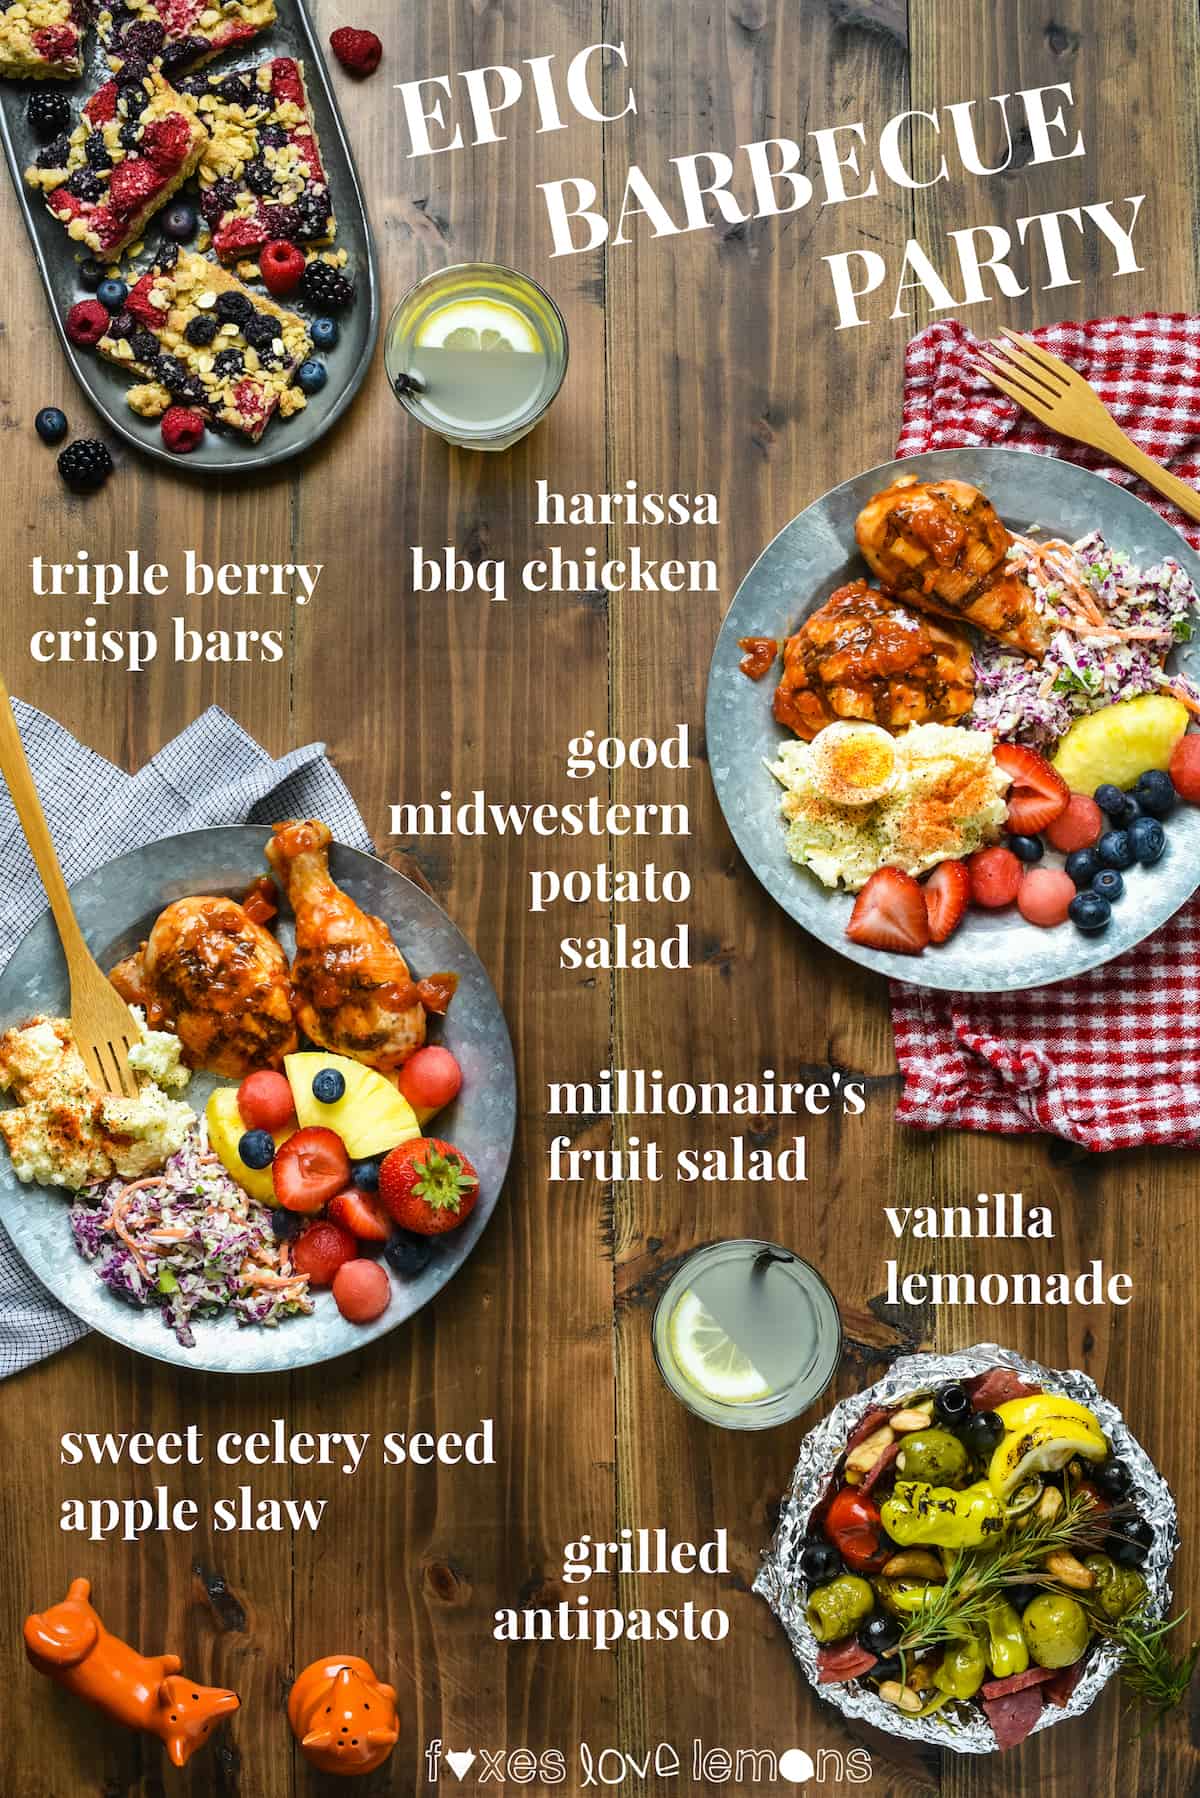 Epic Barbecue Party - Celebrate summer by hosting a backyard party or picnic and serving this "home chef" menu that will be loved by all ages! | foxeslovelemons.com